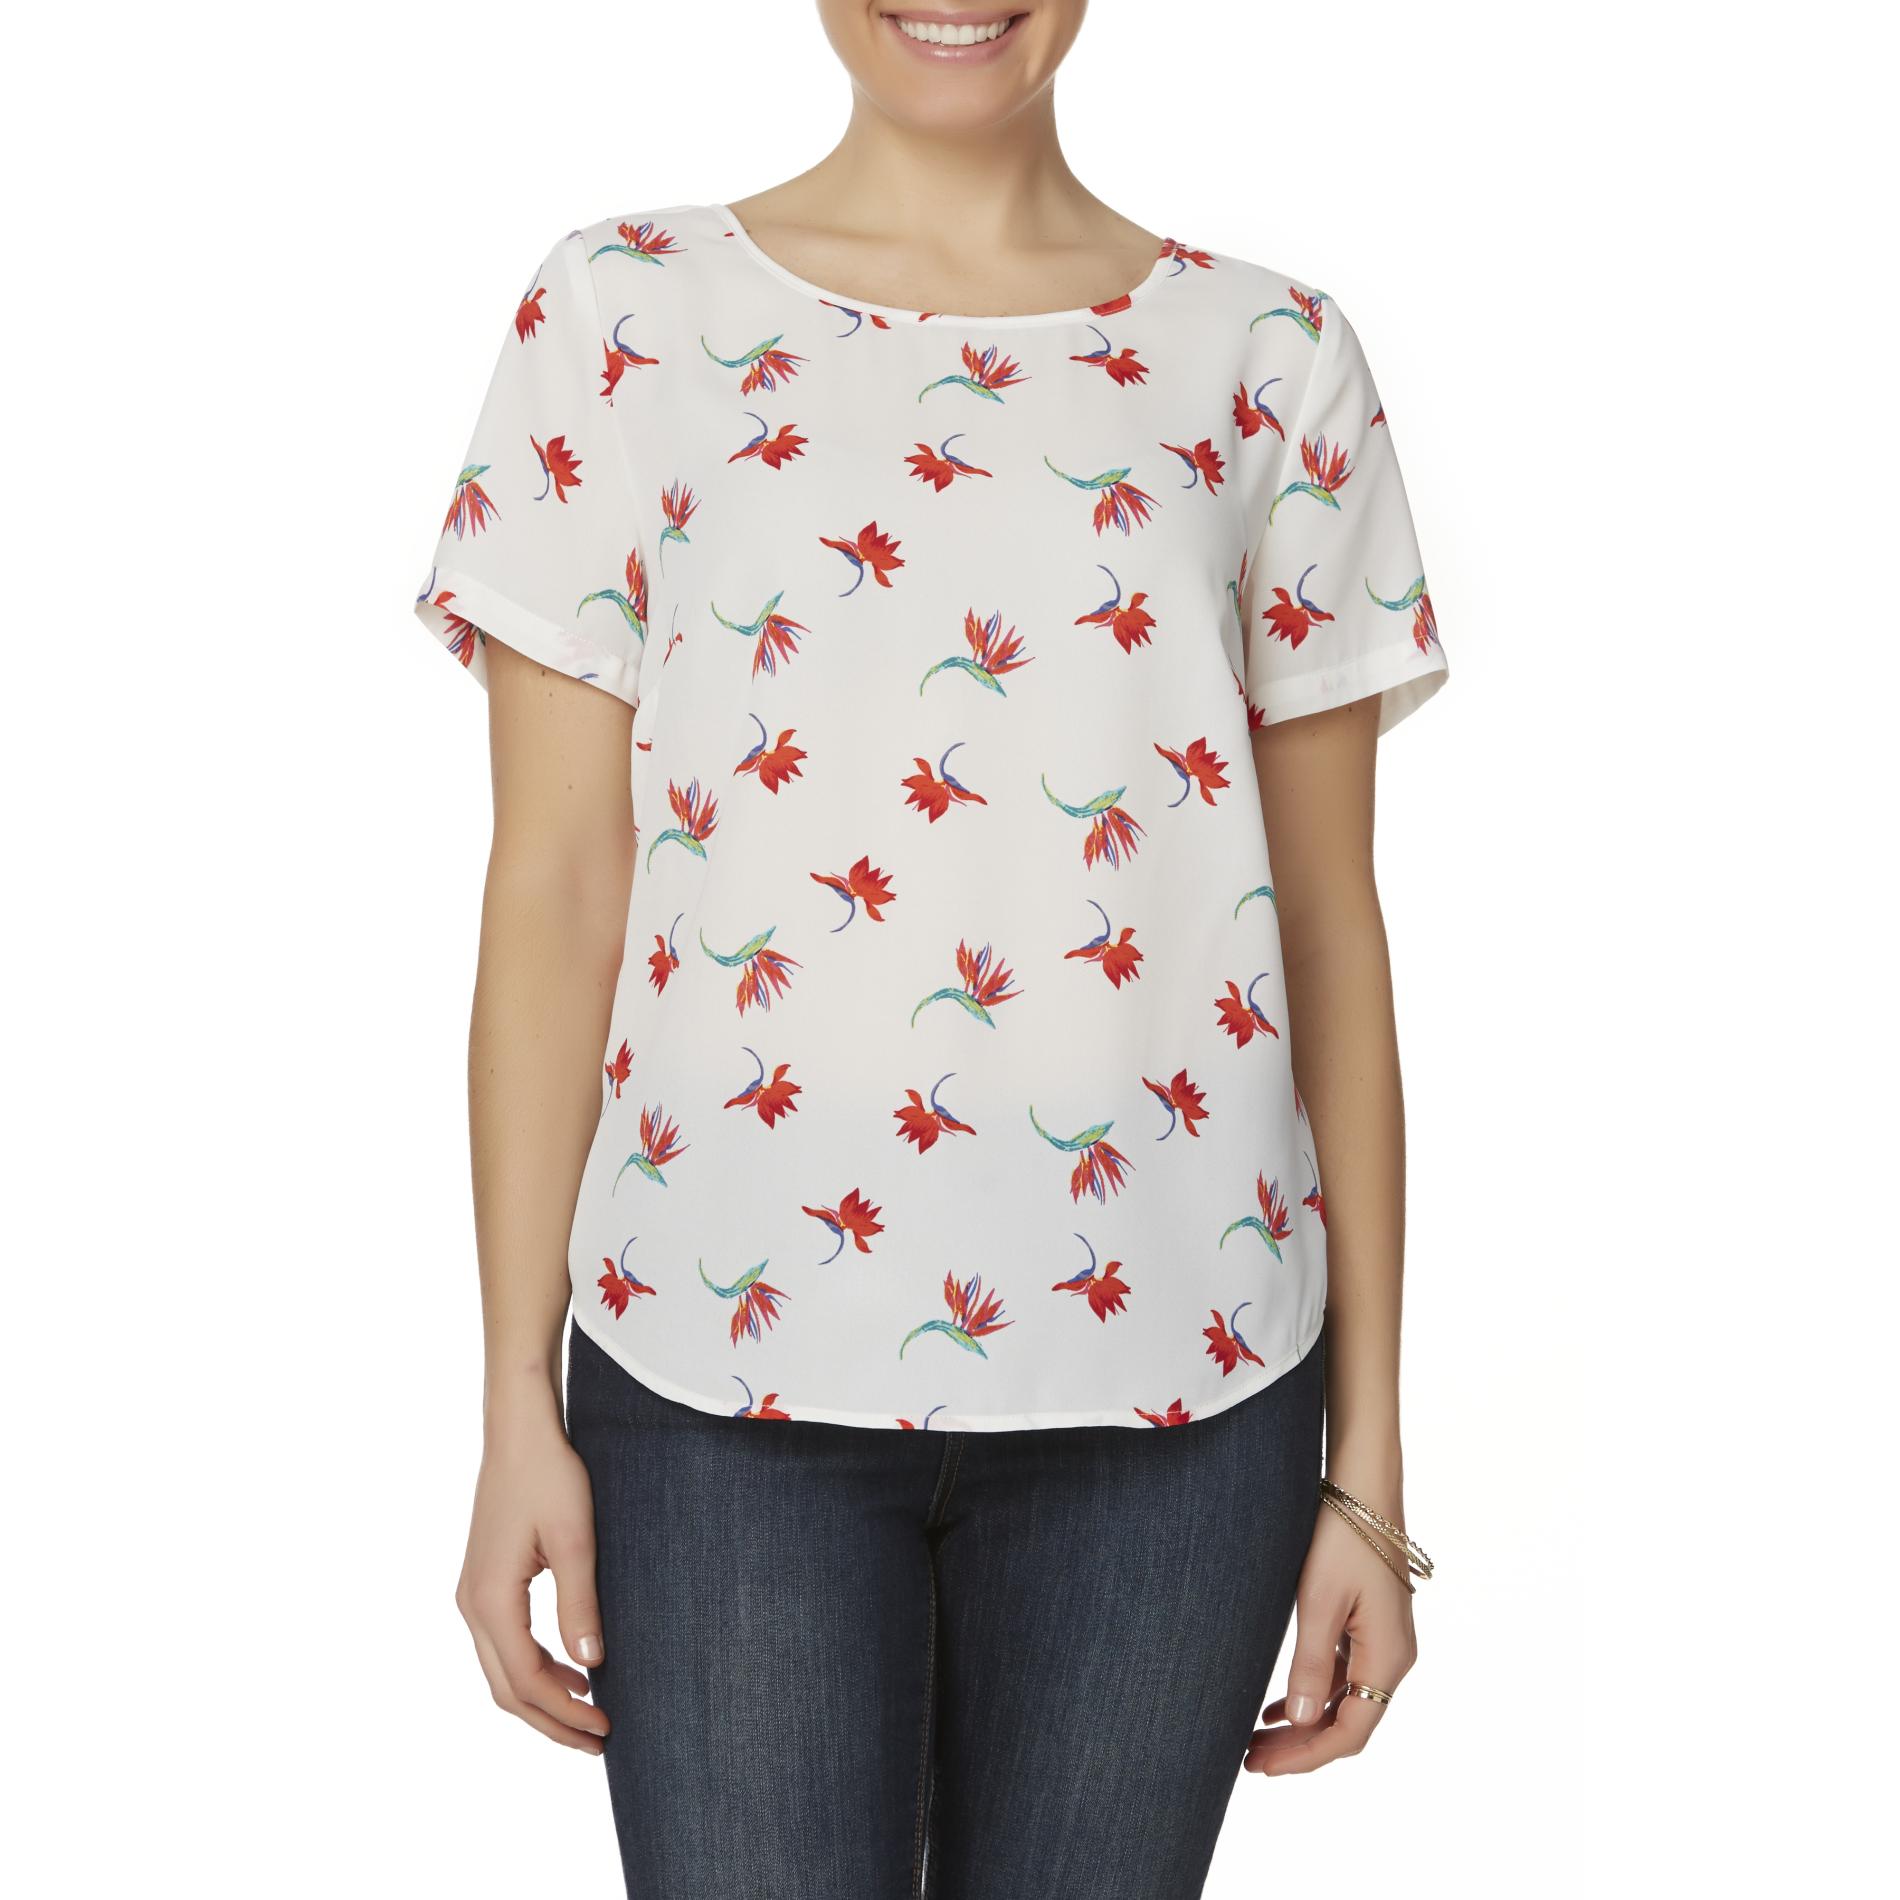 Simply Styled Women's Woven Top - Floral